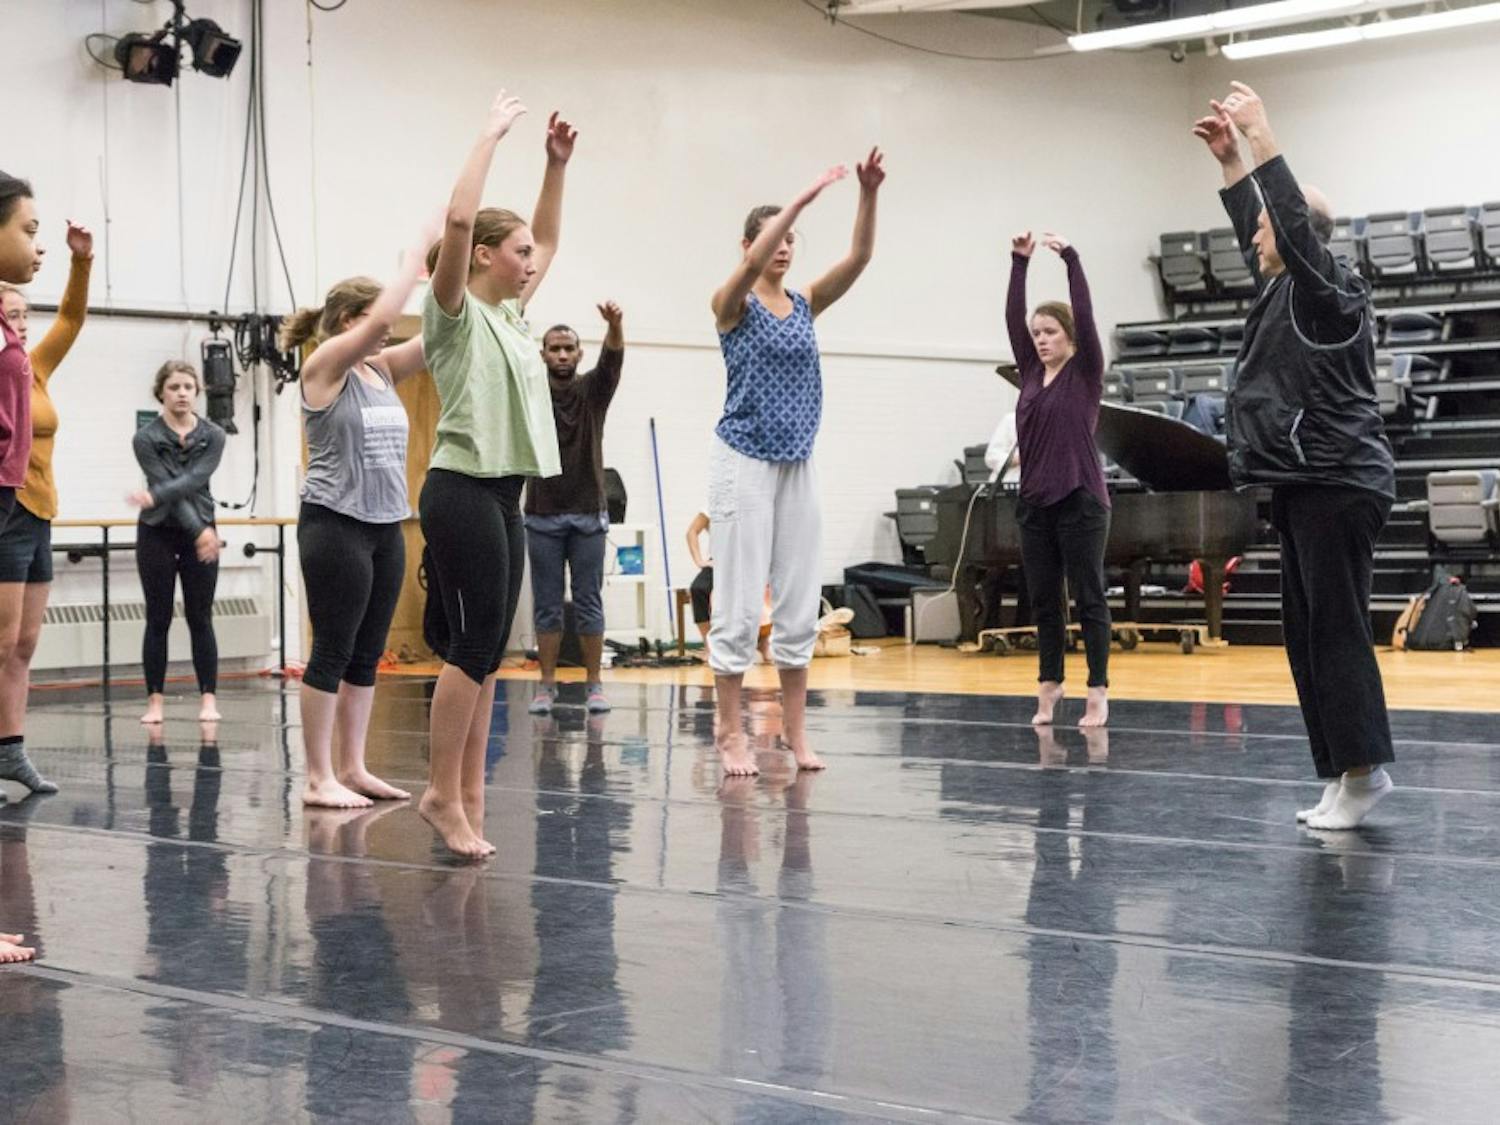 Students in the Summer Dance Institute work directly with David Dorfman, June 21, 2017. Photo by Todd Jacops.